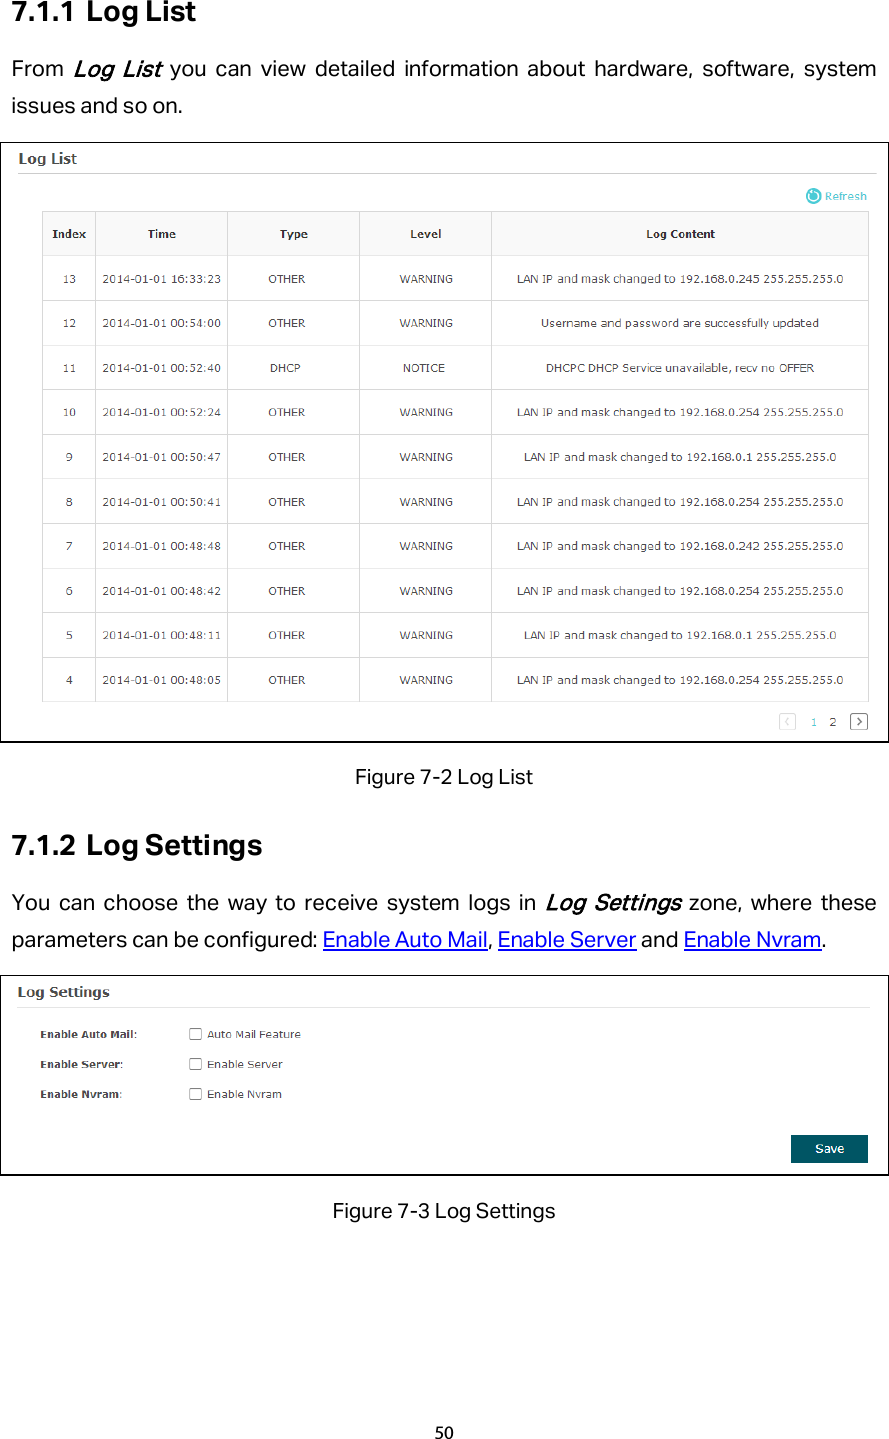 7.1.1 Log List From Log List you can view detailed information about hardware, software, system issues and so on.  Figure 7-2 Log List 7.1.2 Log Settings You can choose the way to receive system logs in Log Settings zone, where these parameters can be configured: Enable Auto Mail, Enable Server and Enable Nvram.  Figure 7-3 Log Settings 50  